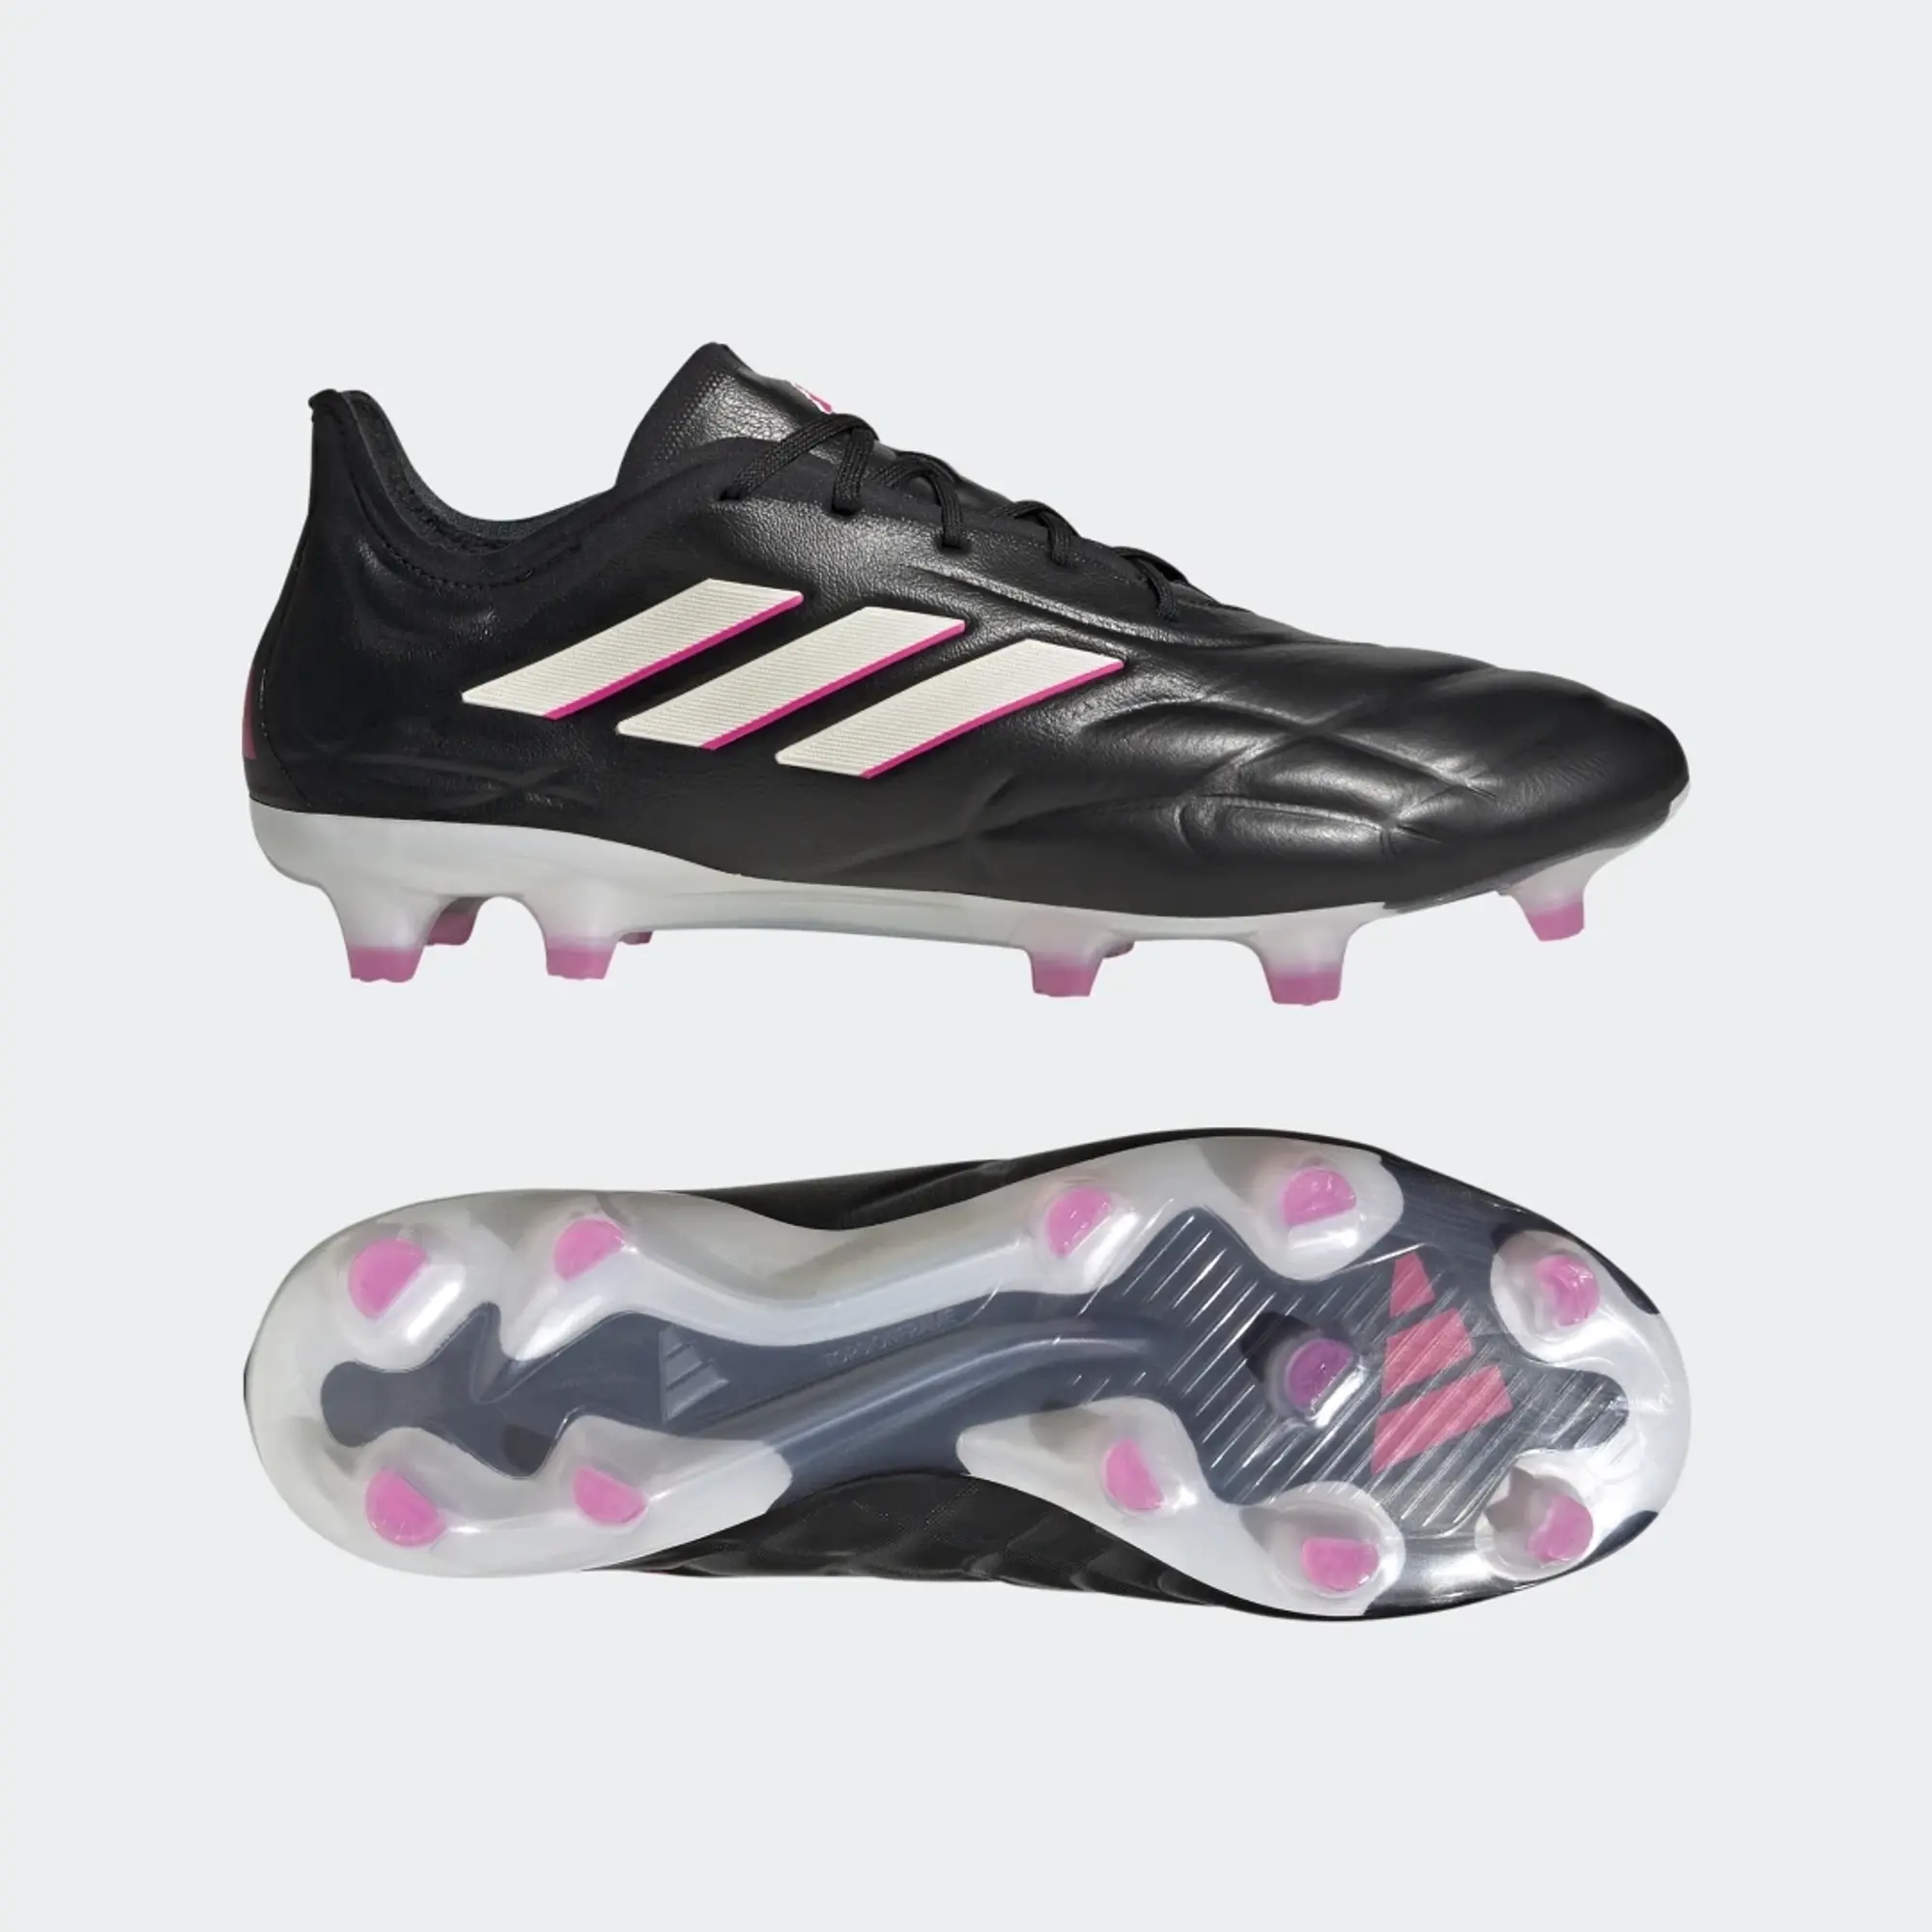 adidas Copa Pure.1 Firm Ground Football Boots Adults - Black